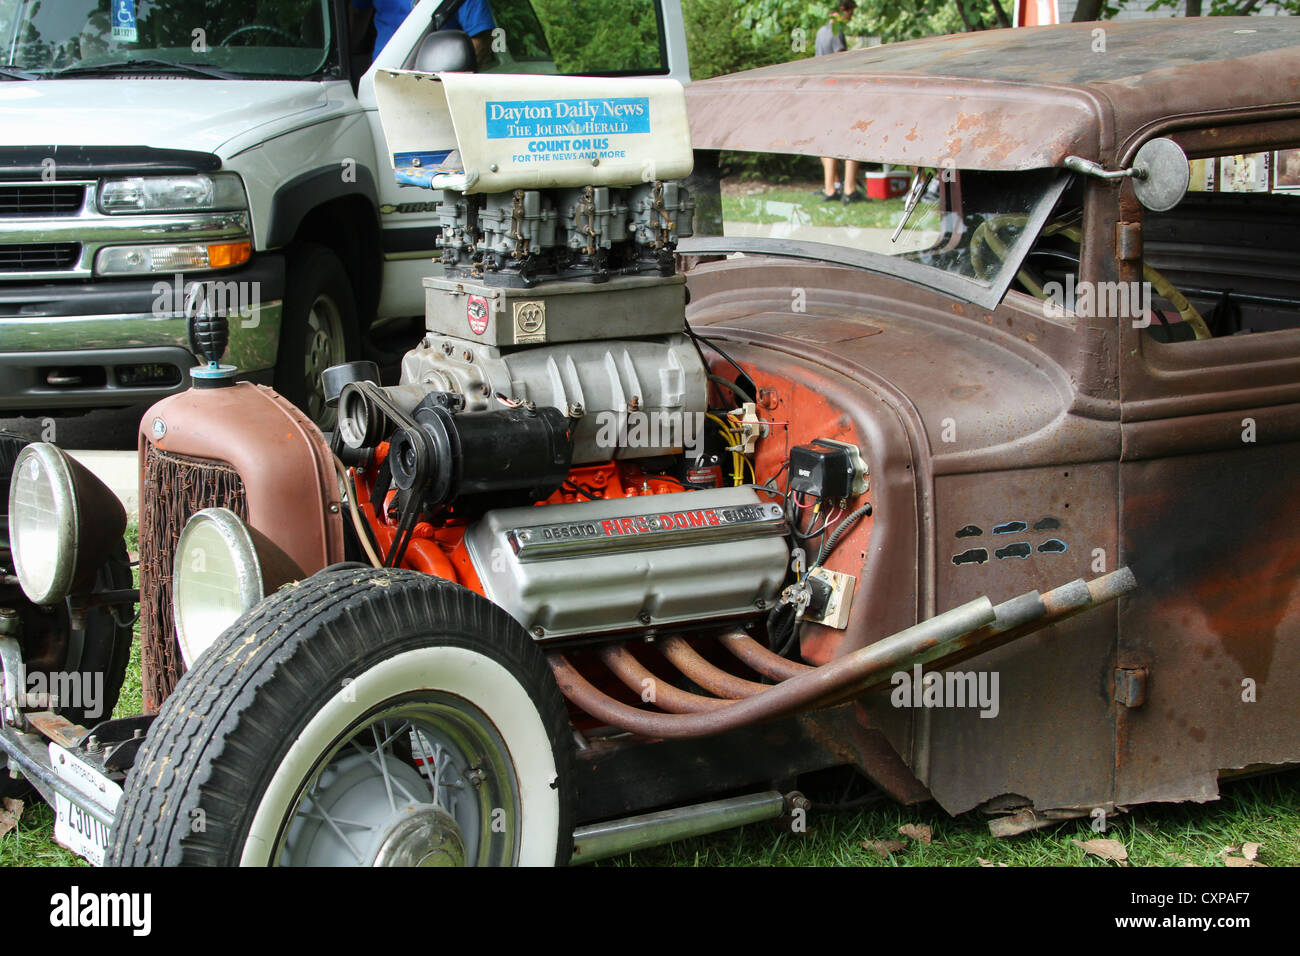 Rat Rod with a newspaper box as an air scoop. Dayton Daily News is the newspaper name. Stock Photo